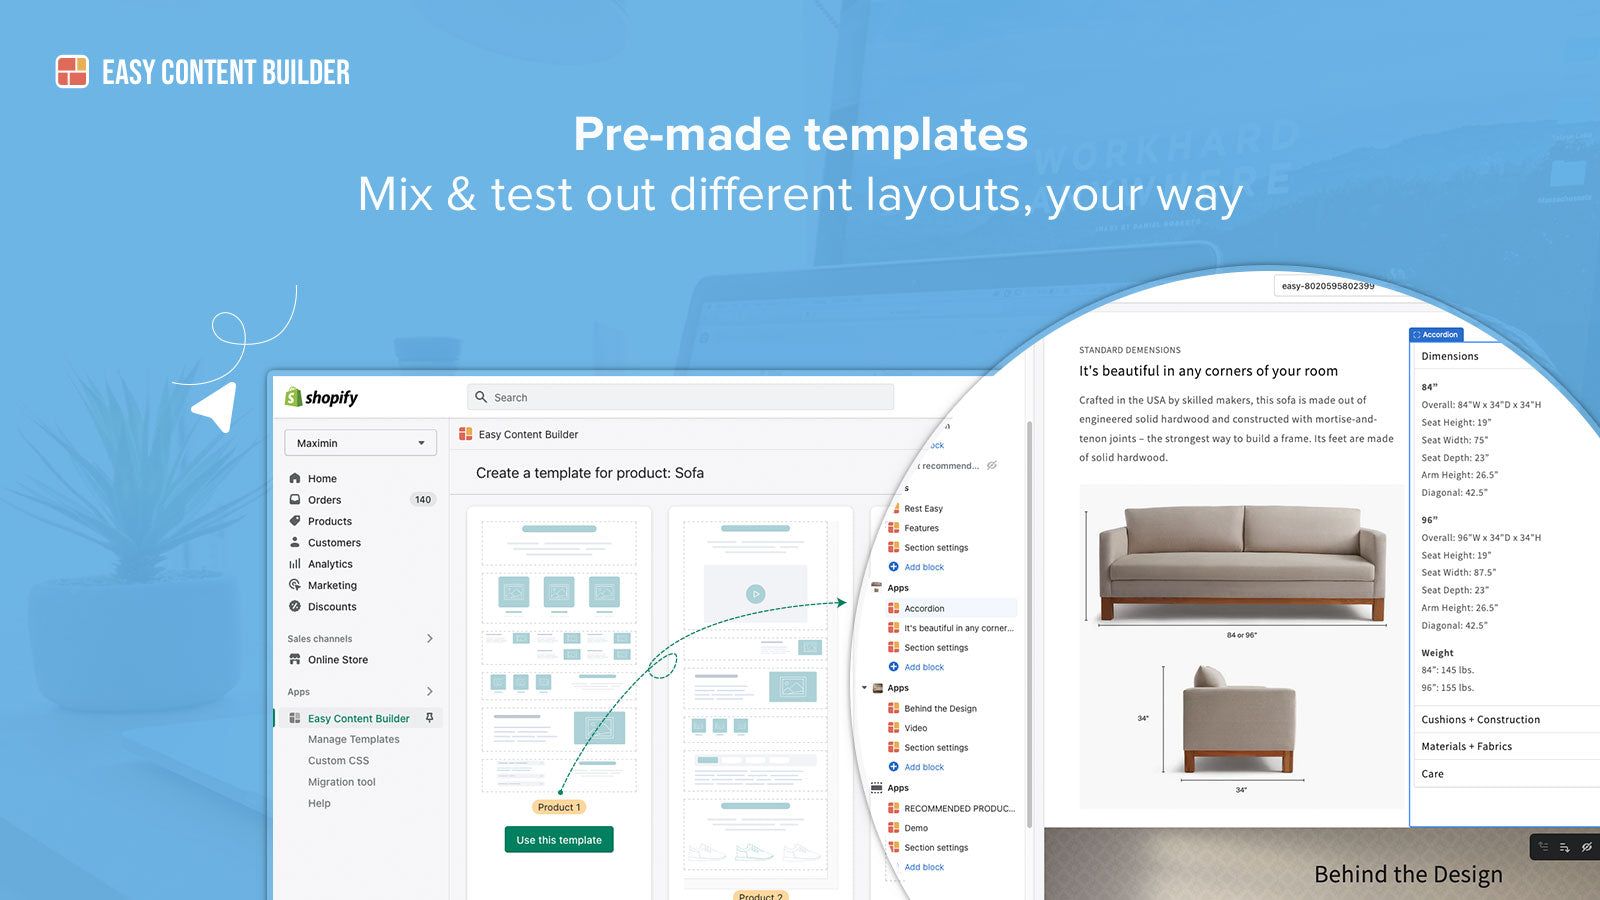 Prebuilt templates - mix & test out many layouts your way